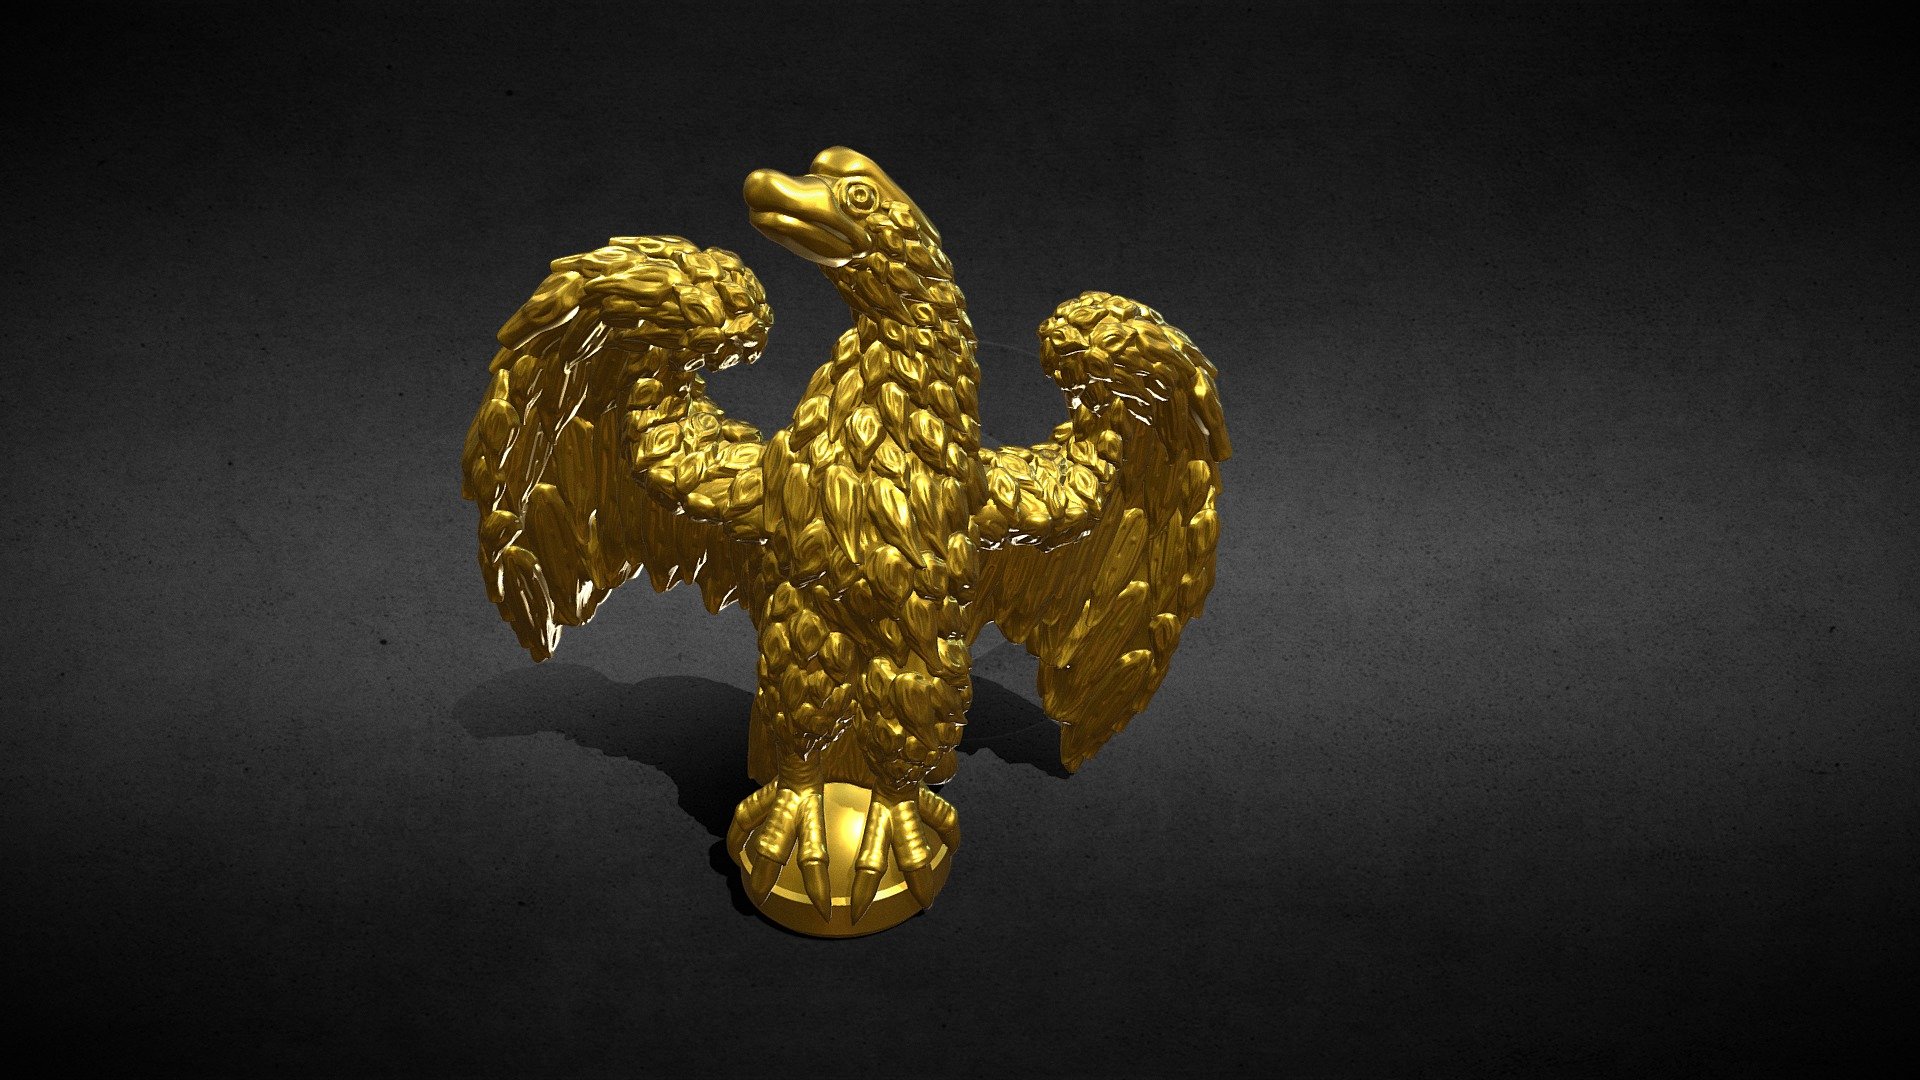 An eagle sculpture in a pose ready for 3d print in one piece I included the OBJ and STL if you need 3D Game Assets or STL files I can do commission works 3d model